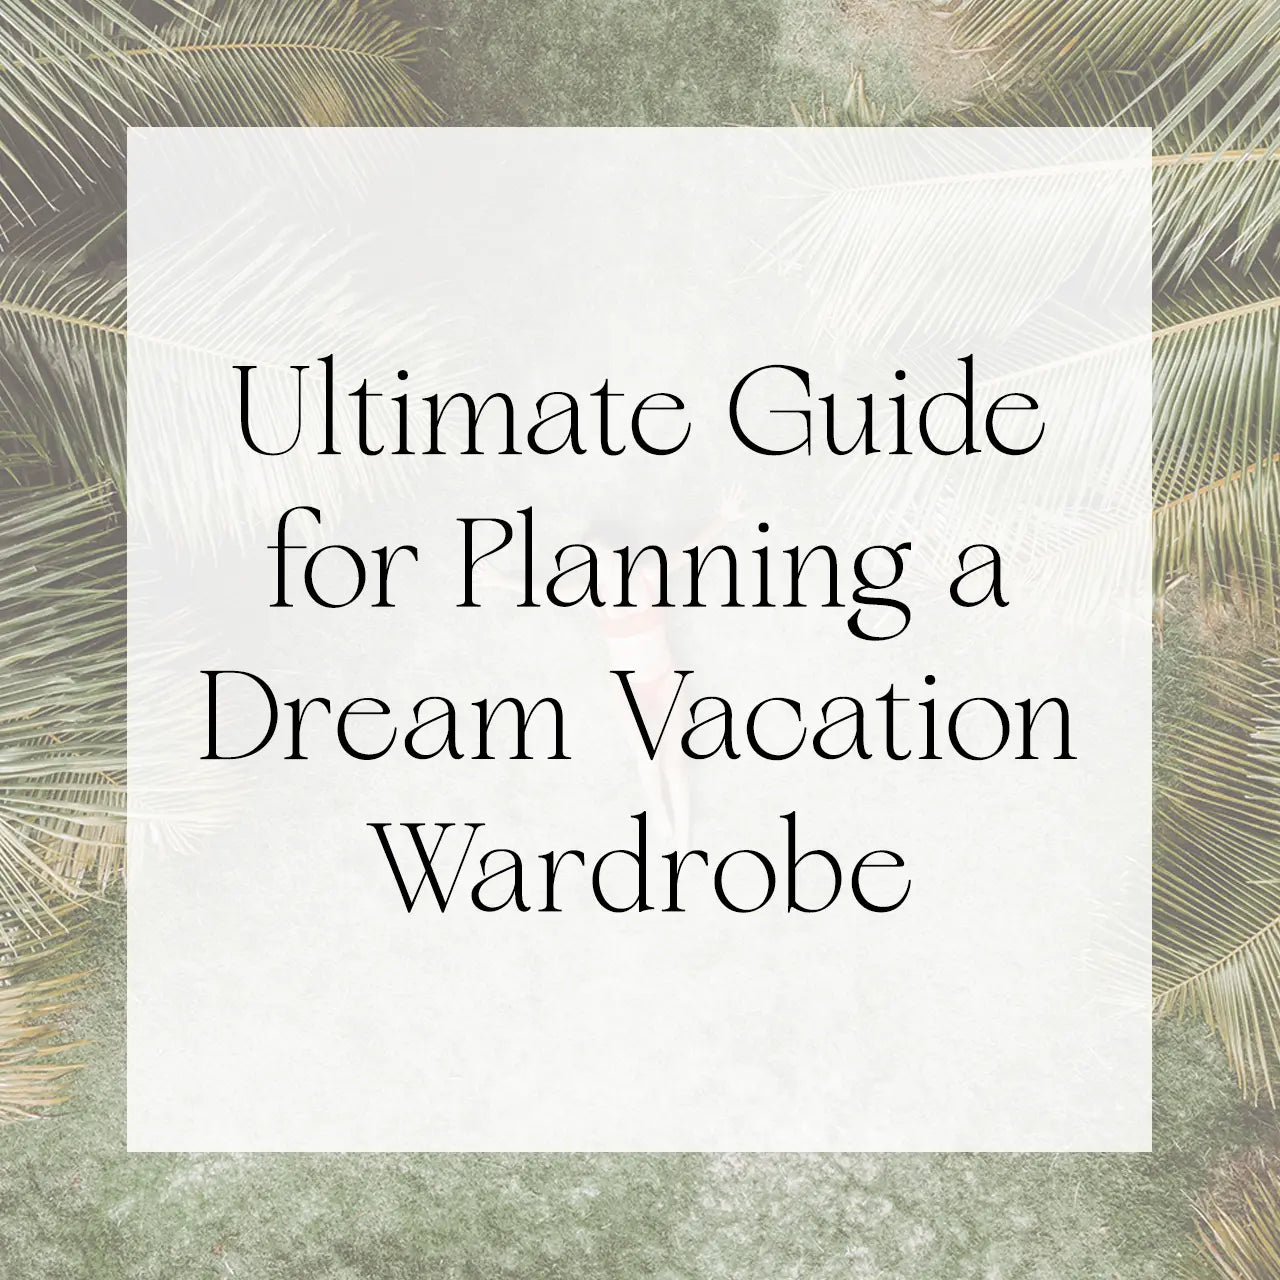 The Ultimate Guide for Planning a Dream Vacation Wardrobe